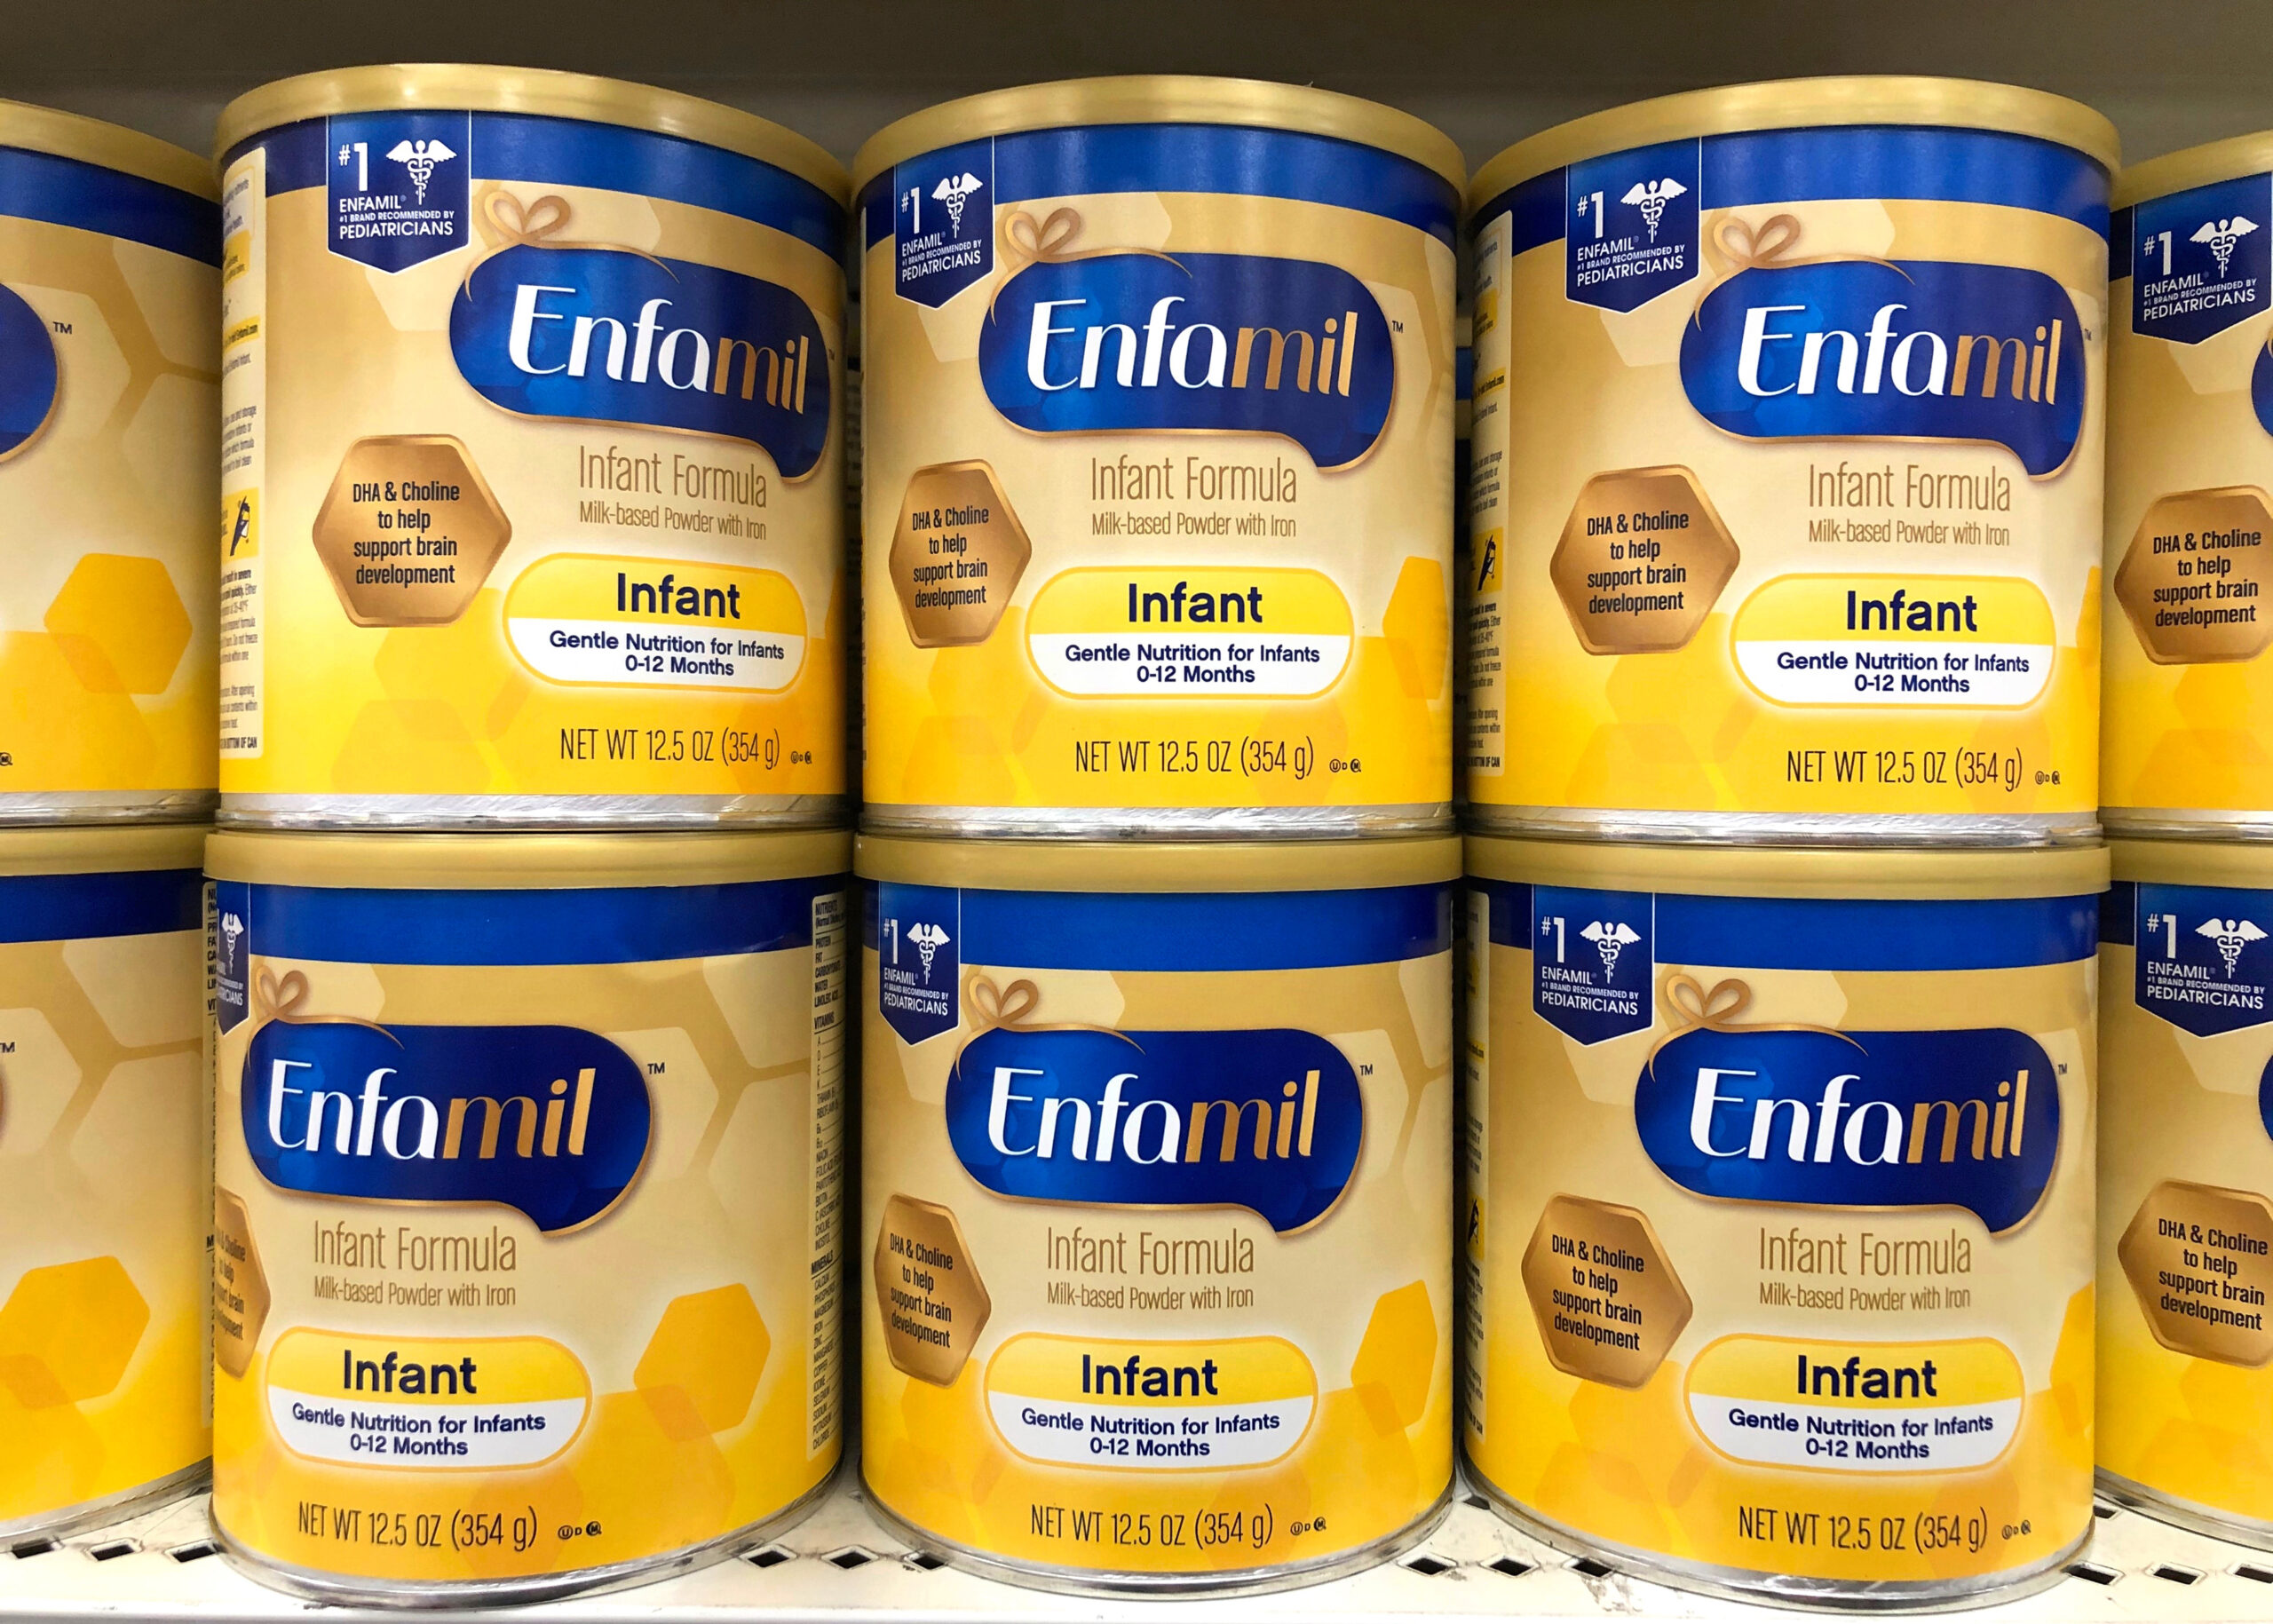 A close up view of yellow Enfamil infant formula cans stacked on a retail shelf.